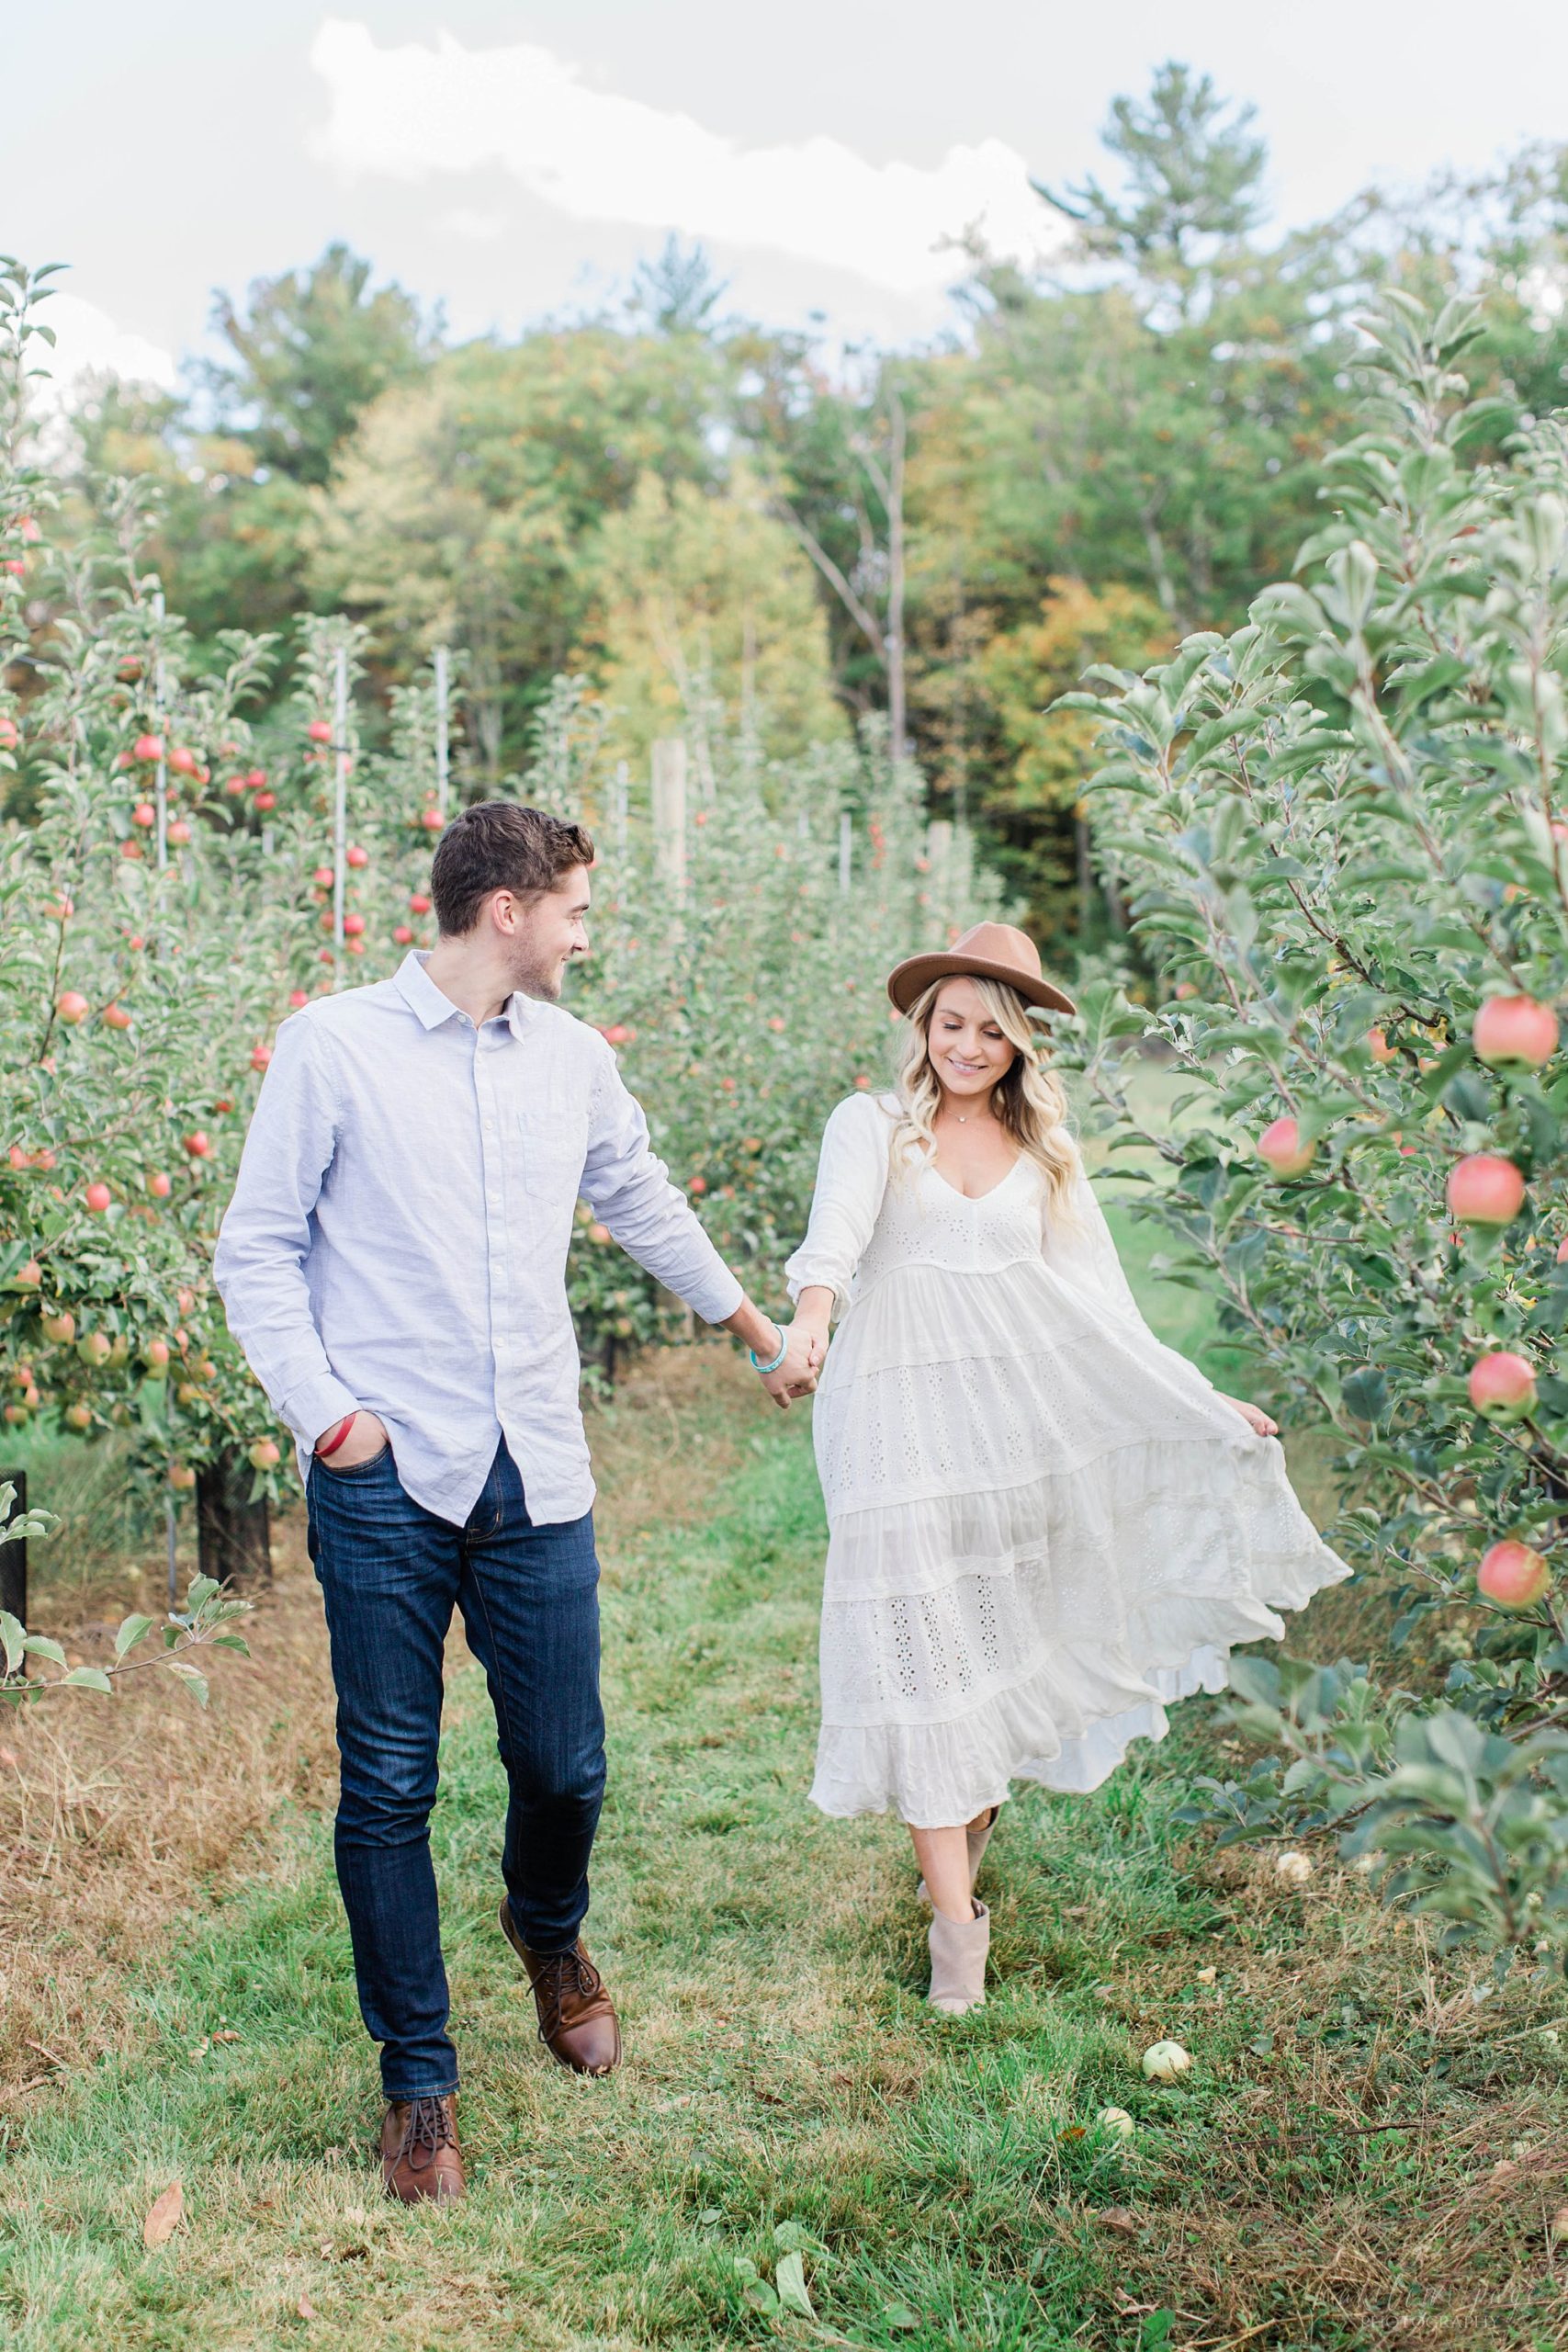 Picking a Color Palette for Your Engagement Session Page Photography. New Hampshire Wedding Photographer